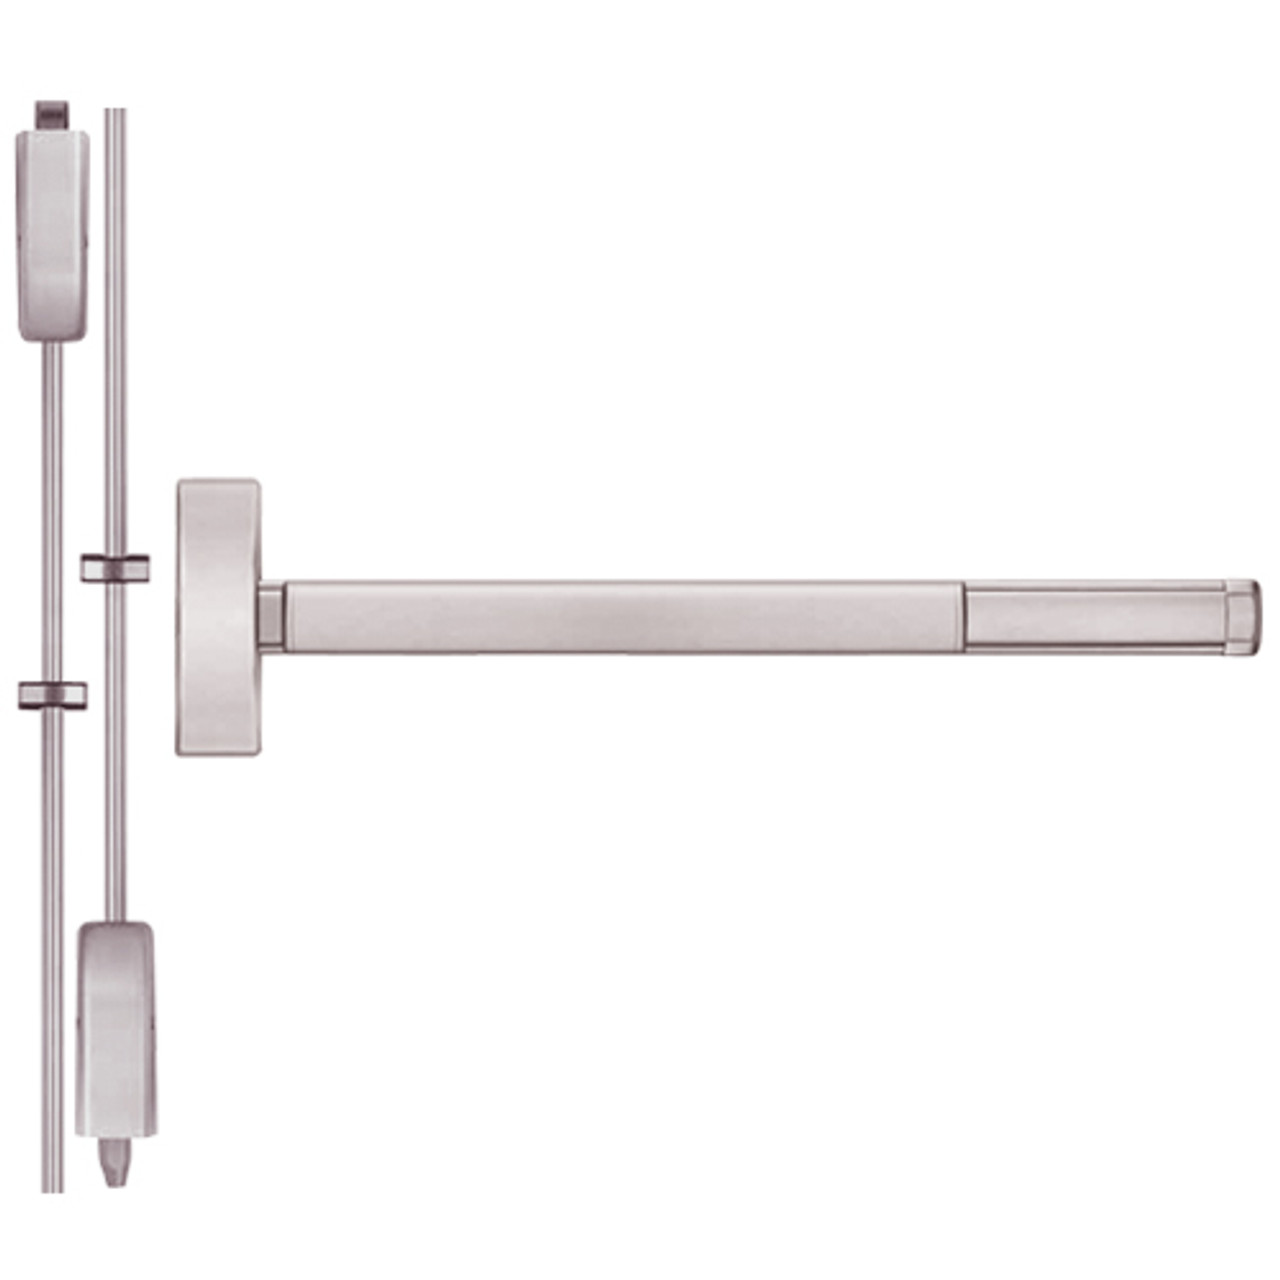 DEFL2215LBR-628-36 PHI 2200 Series Fire Rated Apex Surface Vertical Rod Device with Delayed Egress Prepped for Thumb Piece Always Active in Satin Aluminum Finish